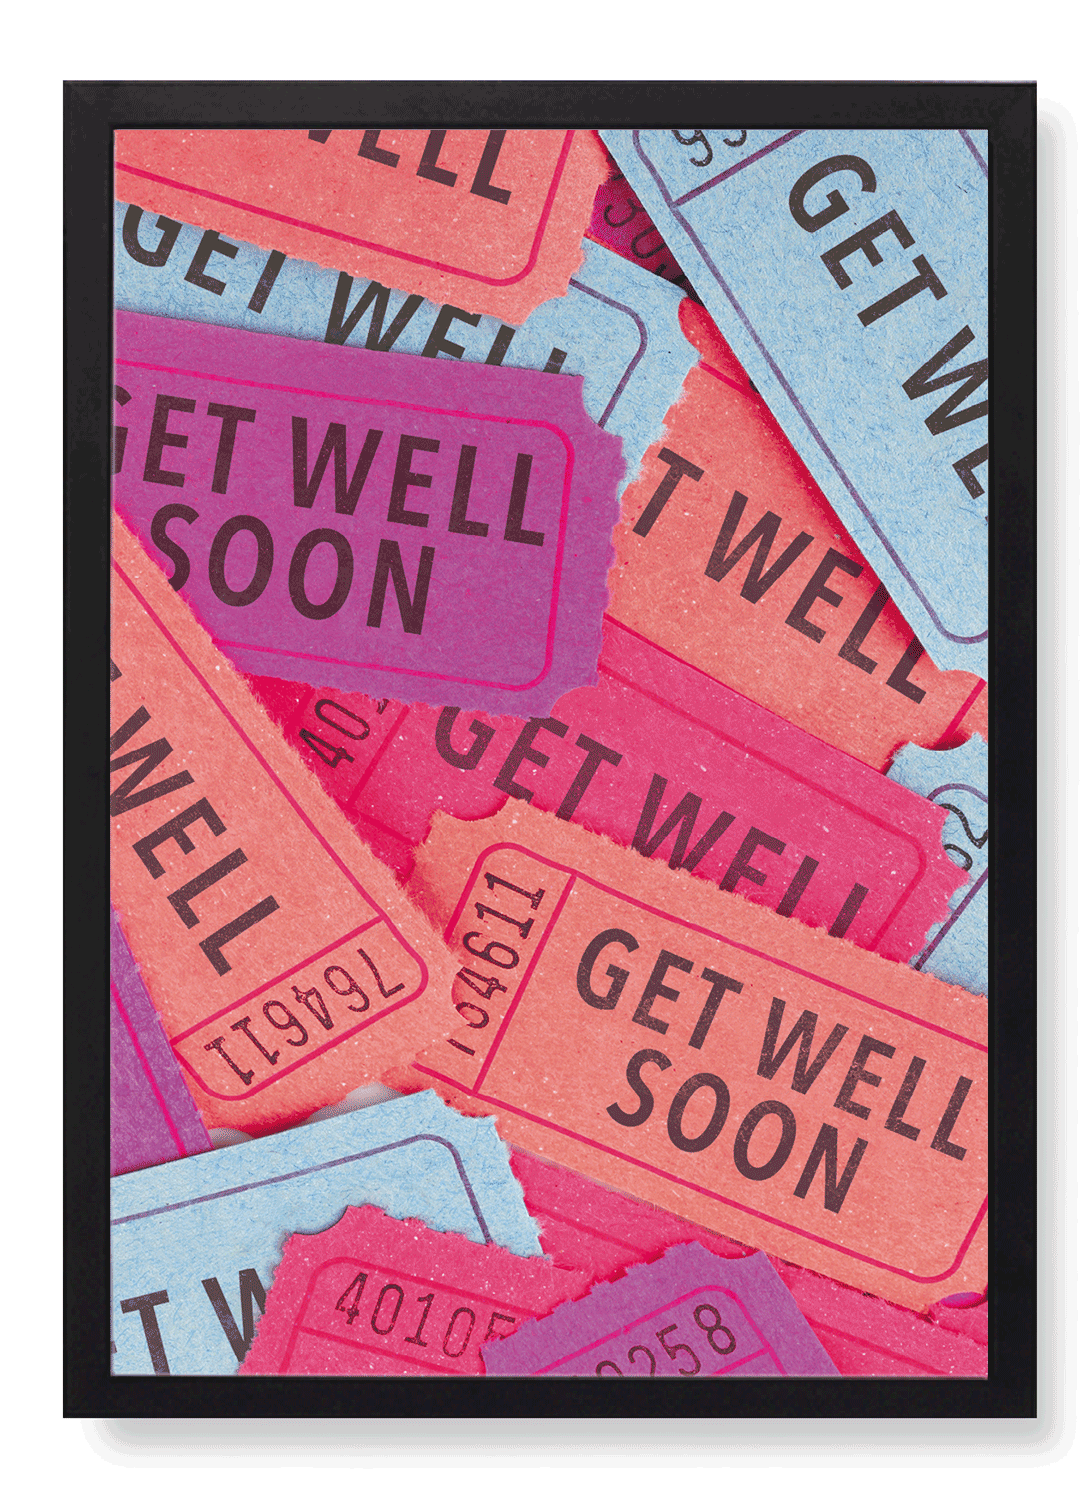 TICKETS OF GET WELL